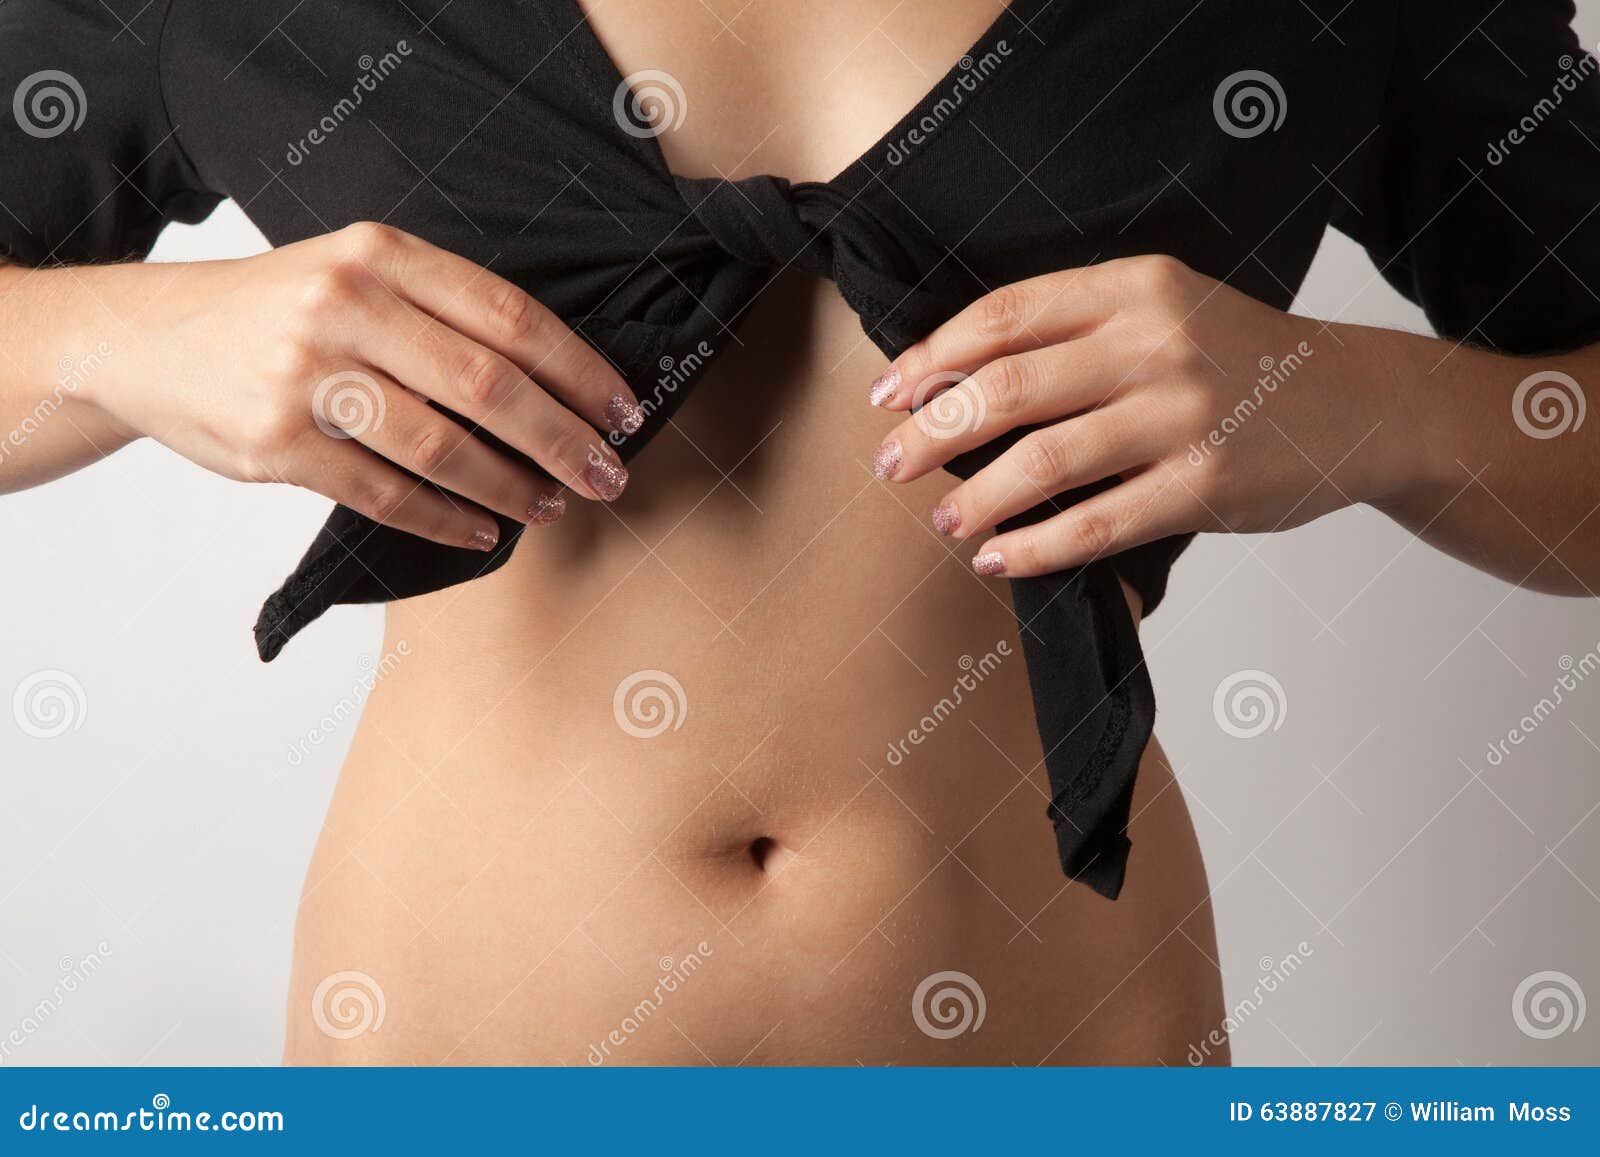 anonymous woman tying crop top